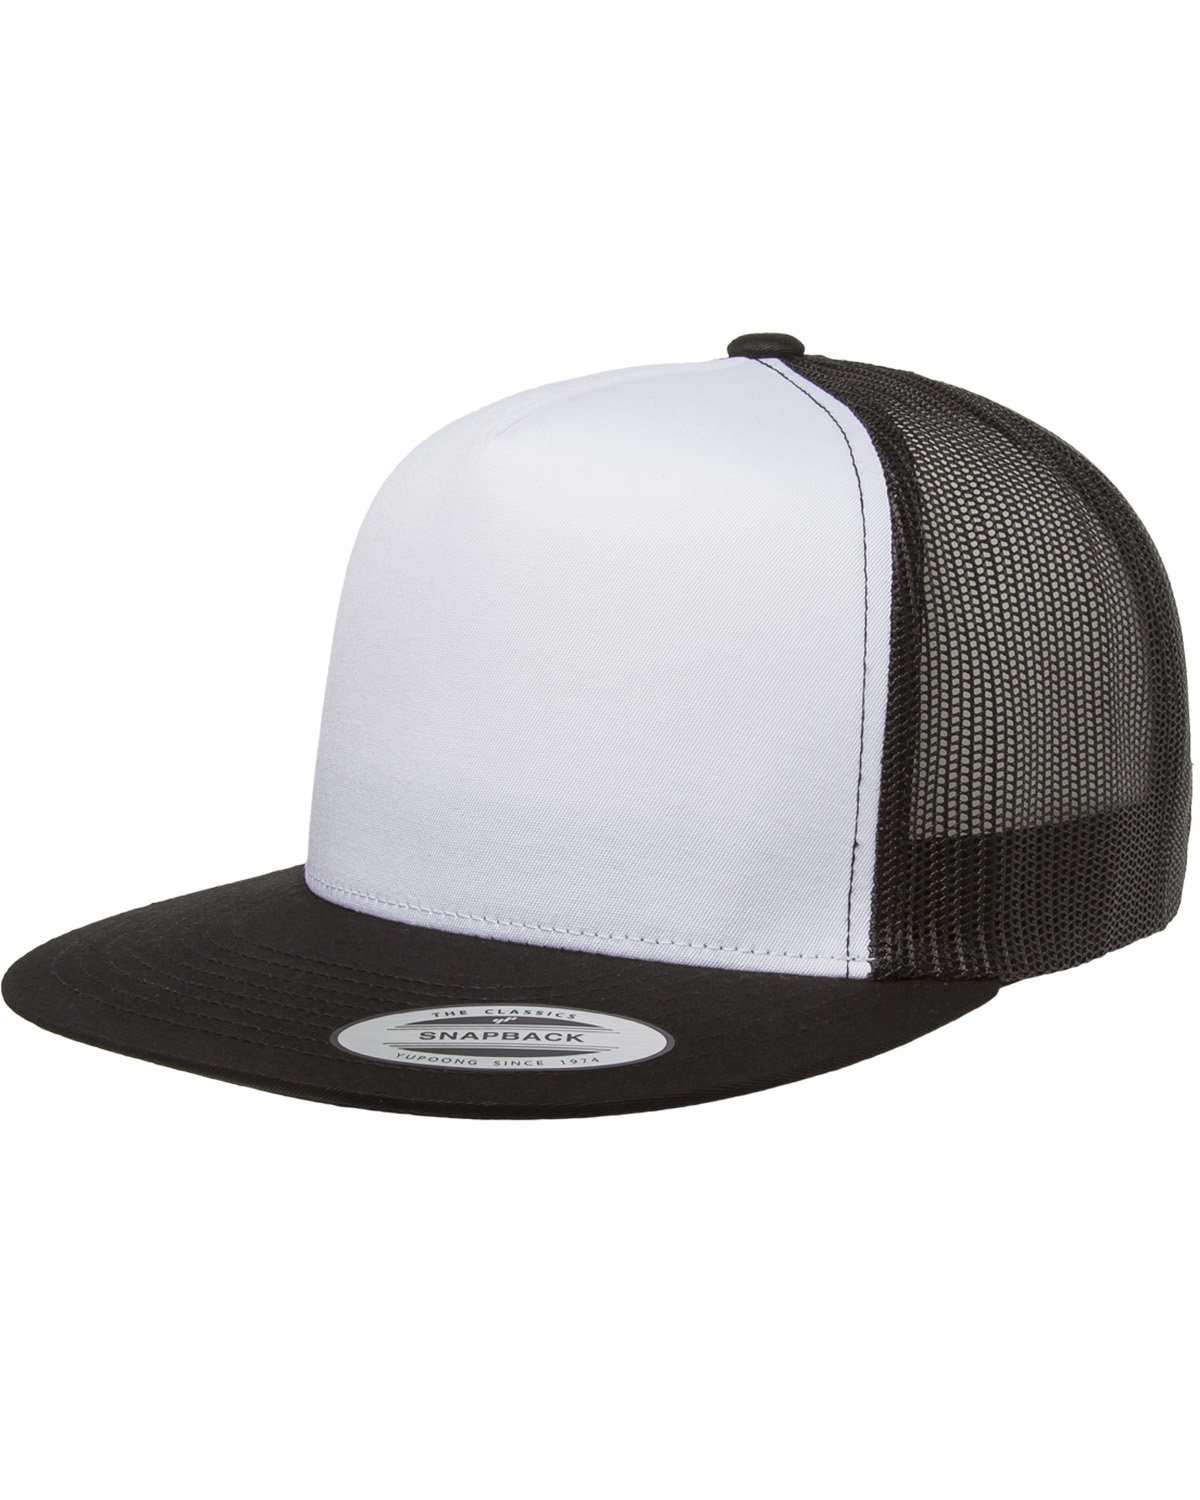 Picture of Yupoong Classic Trucker with White Front Panel Cap